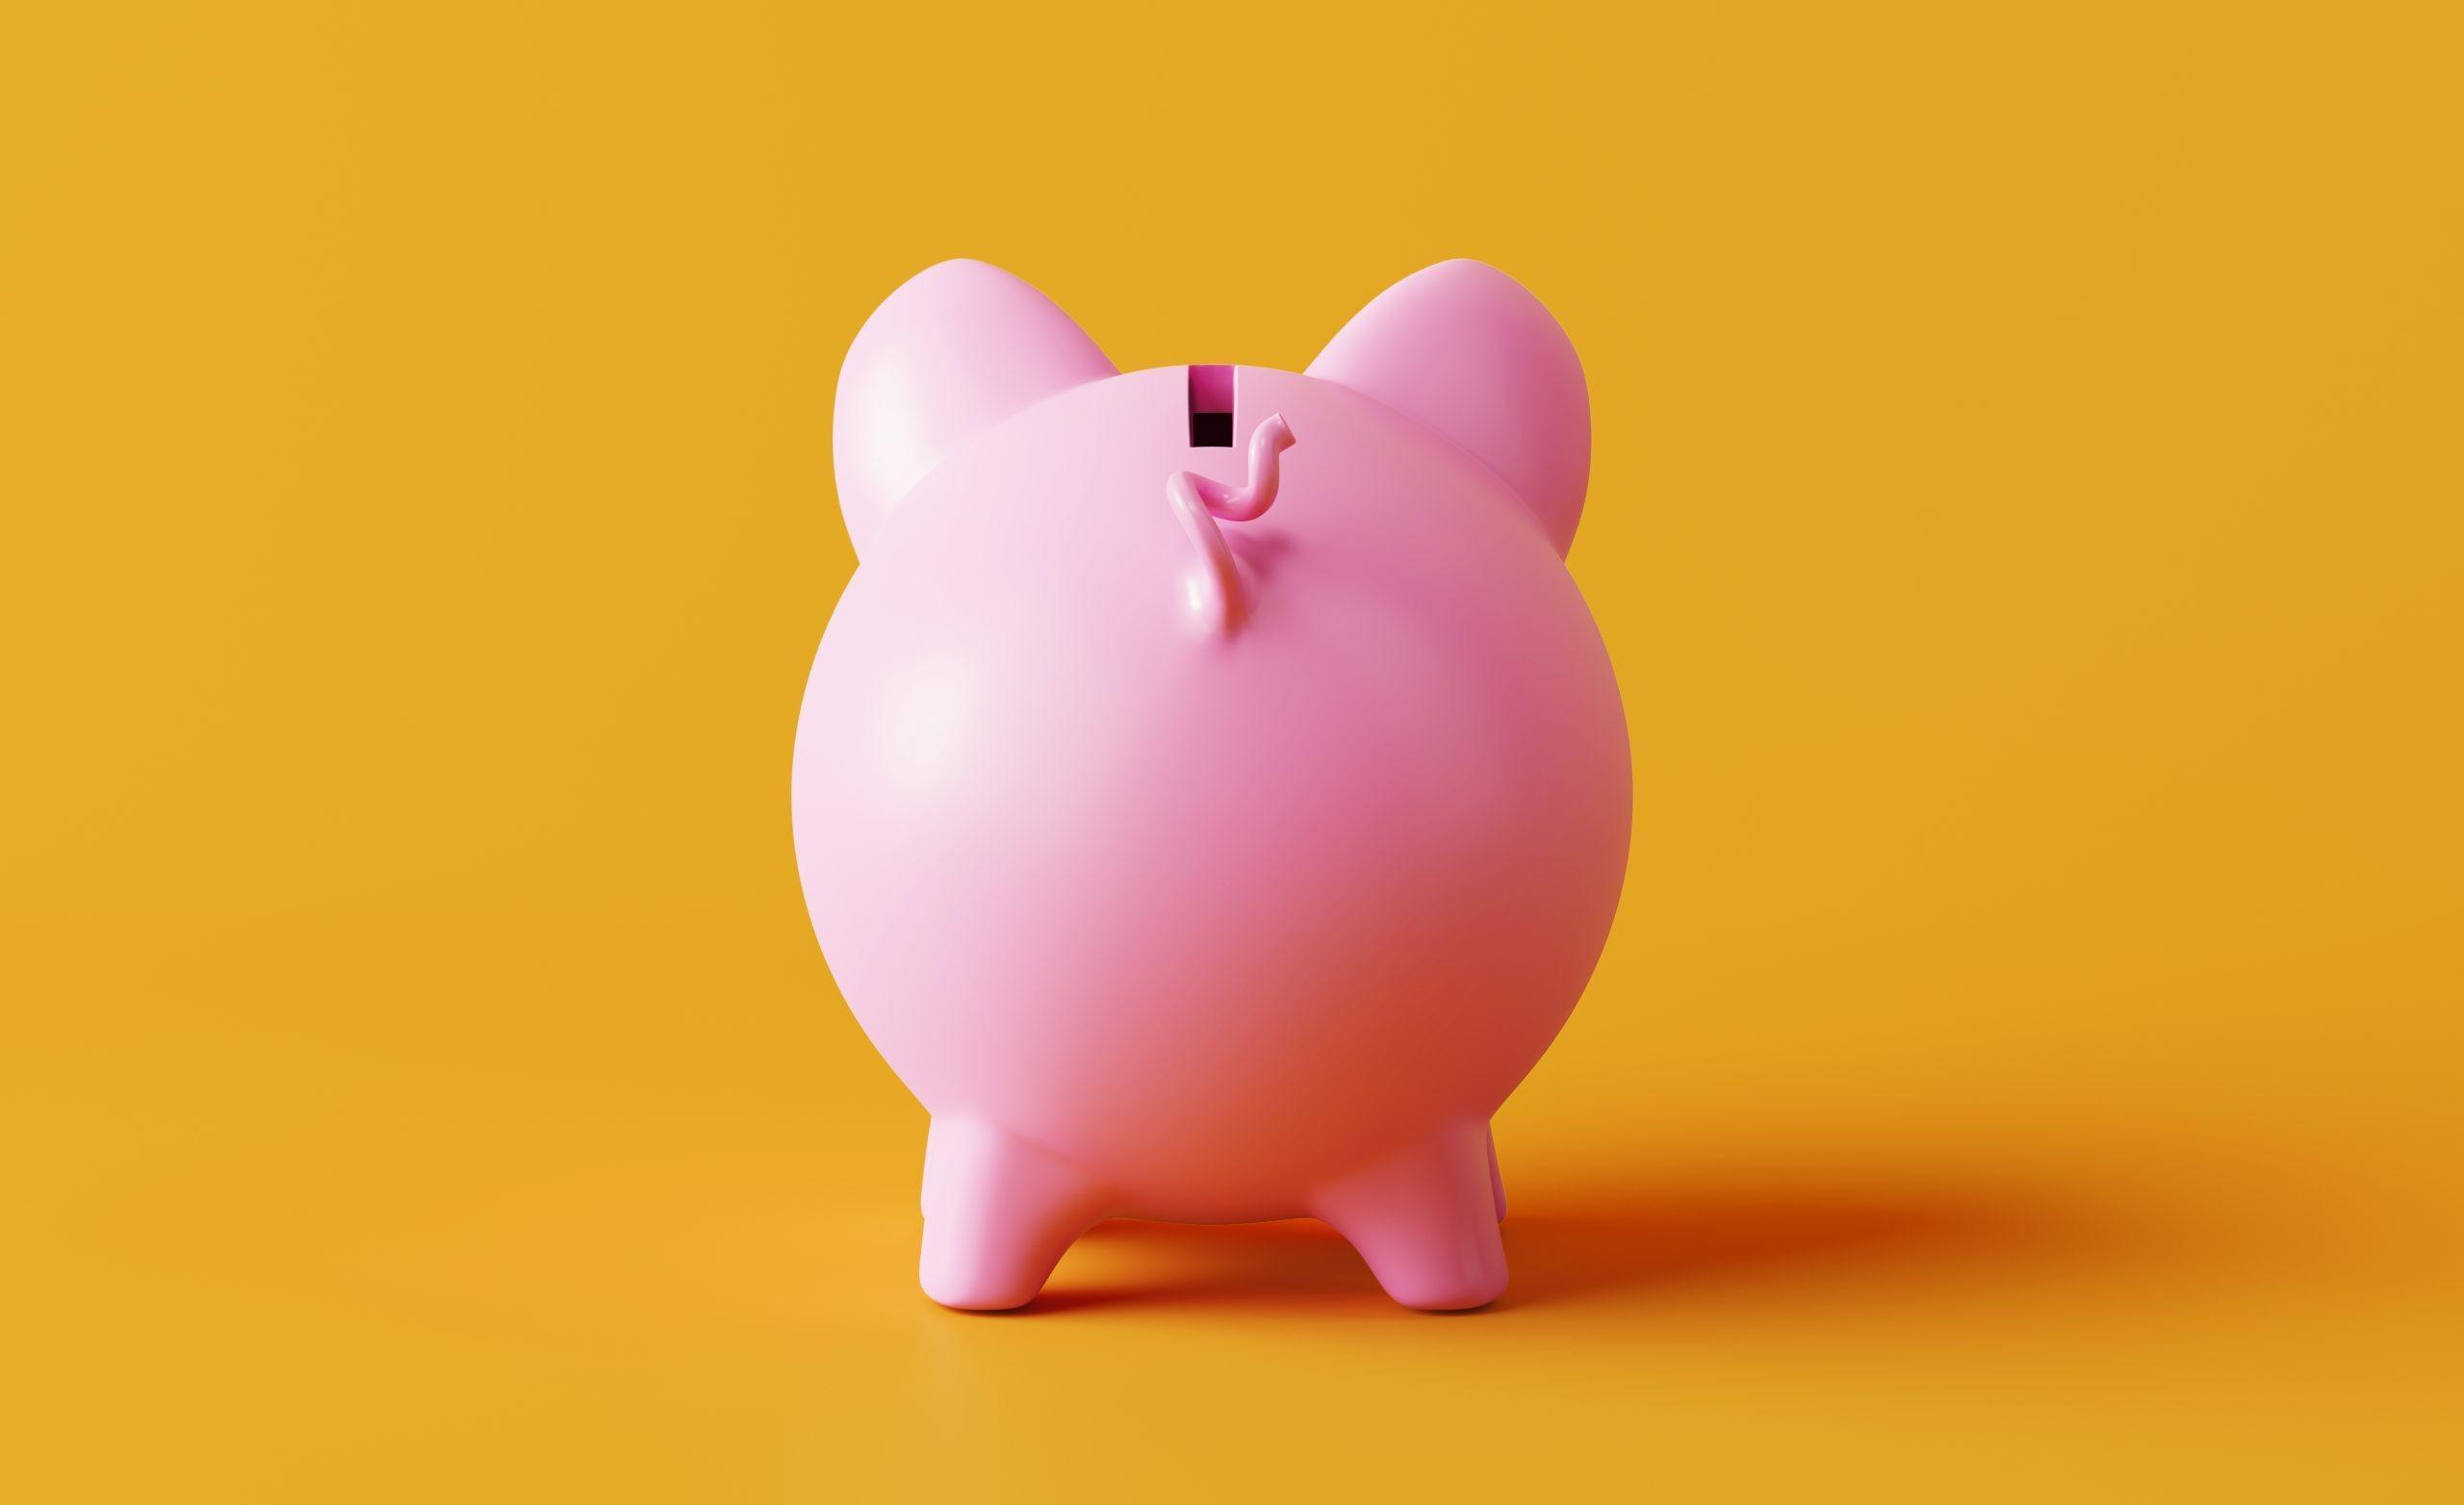 Piggy bank standing on yellow background. Horizontal composition with copy space. Great use for savings concepts.